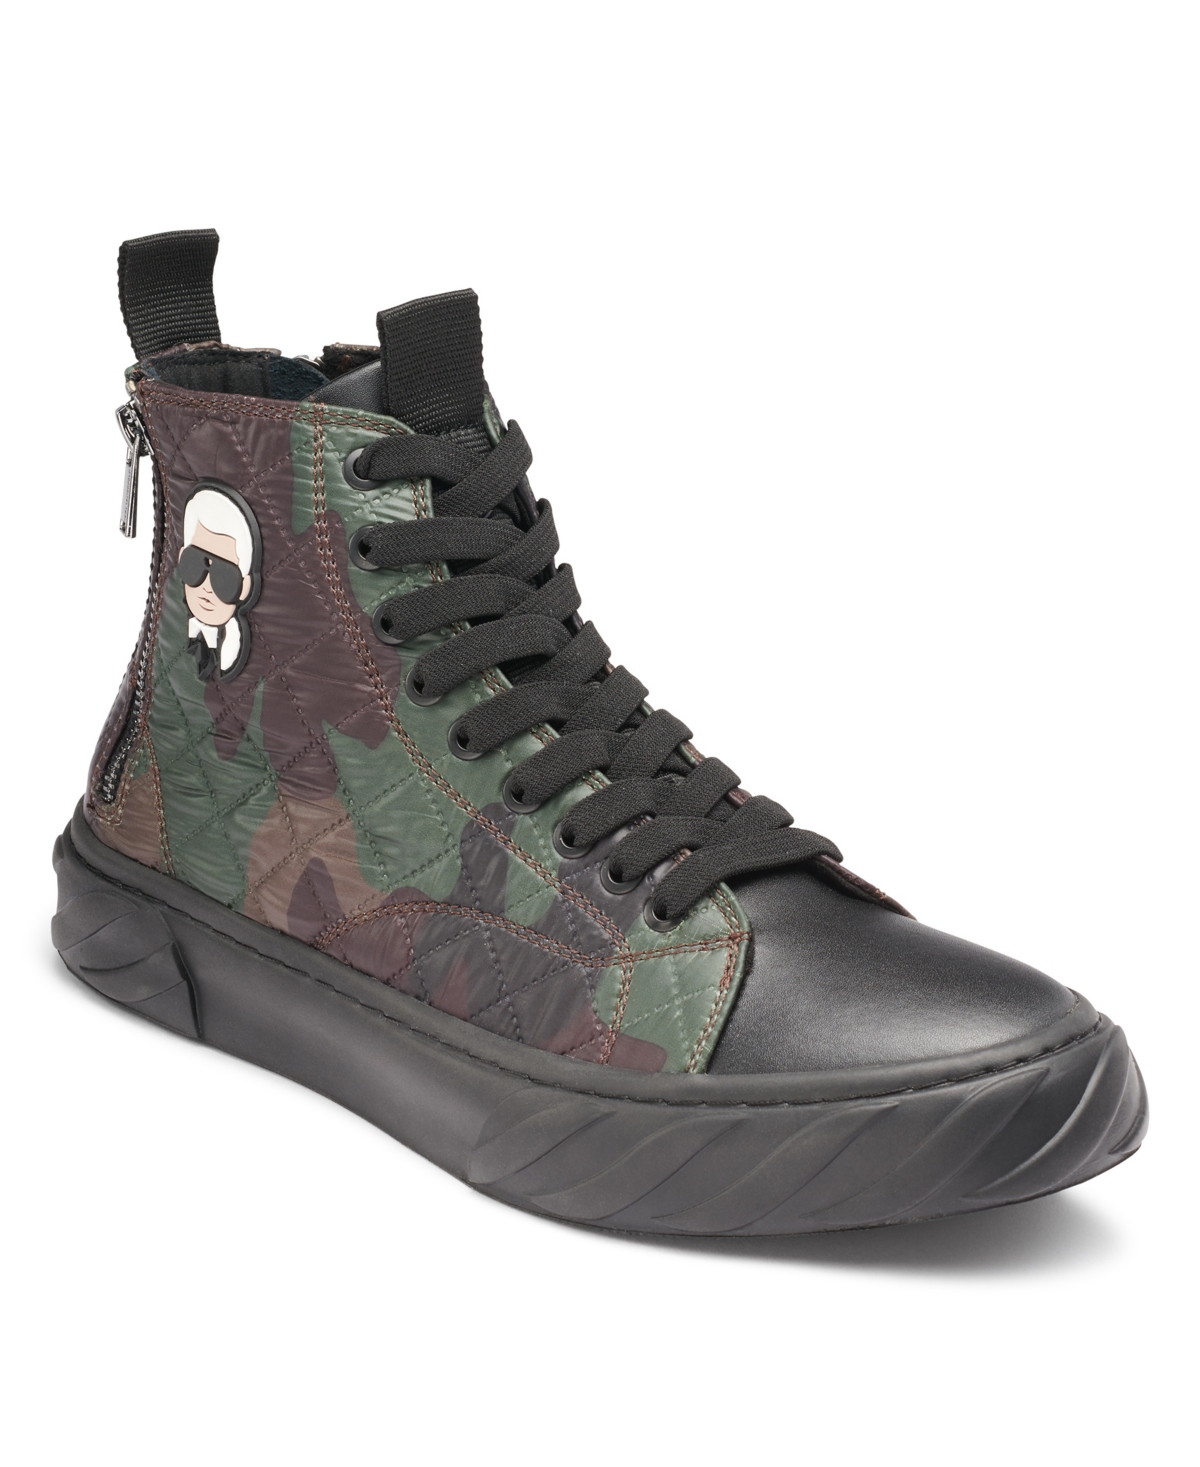 Karl Lagerfeld Men's Quilted Camo Double Back Zip High Top with Karl Head Patch Sneaker - Black, Brown